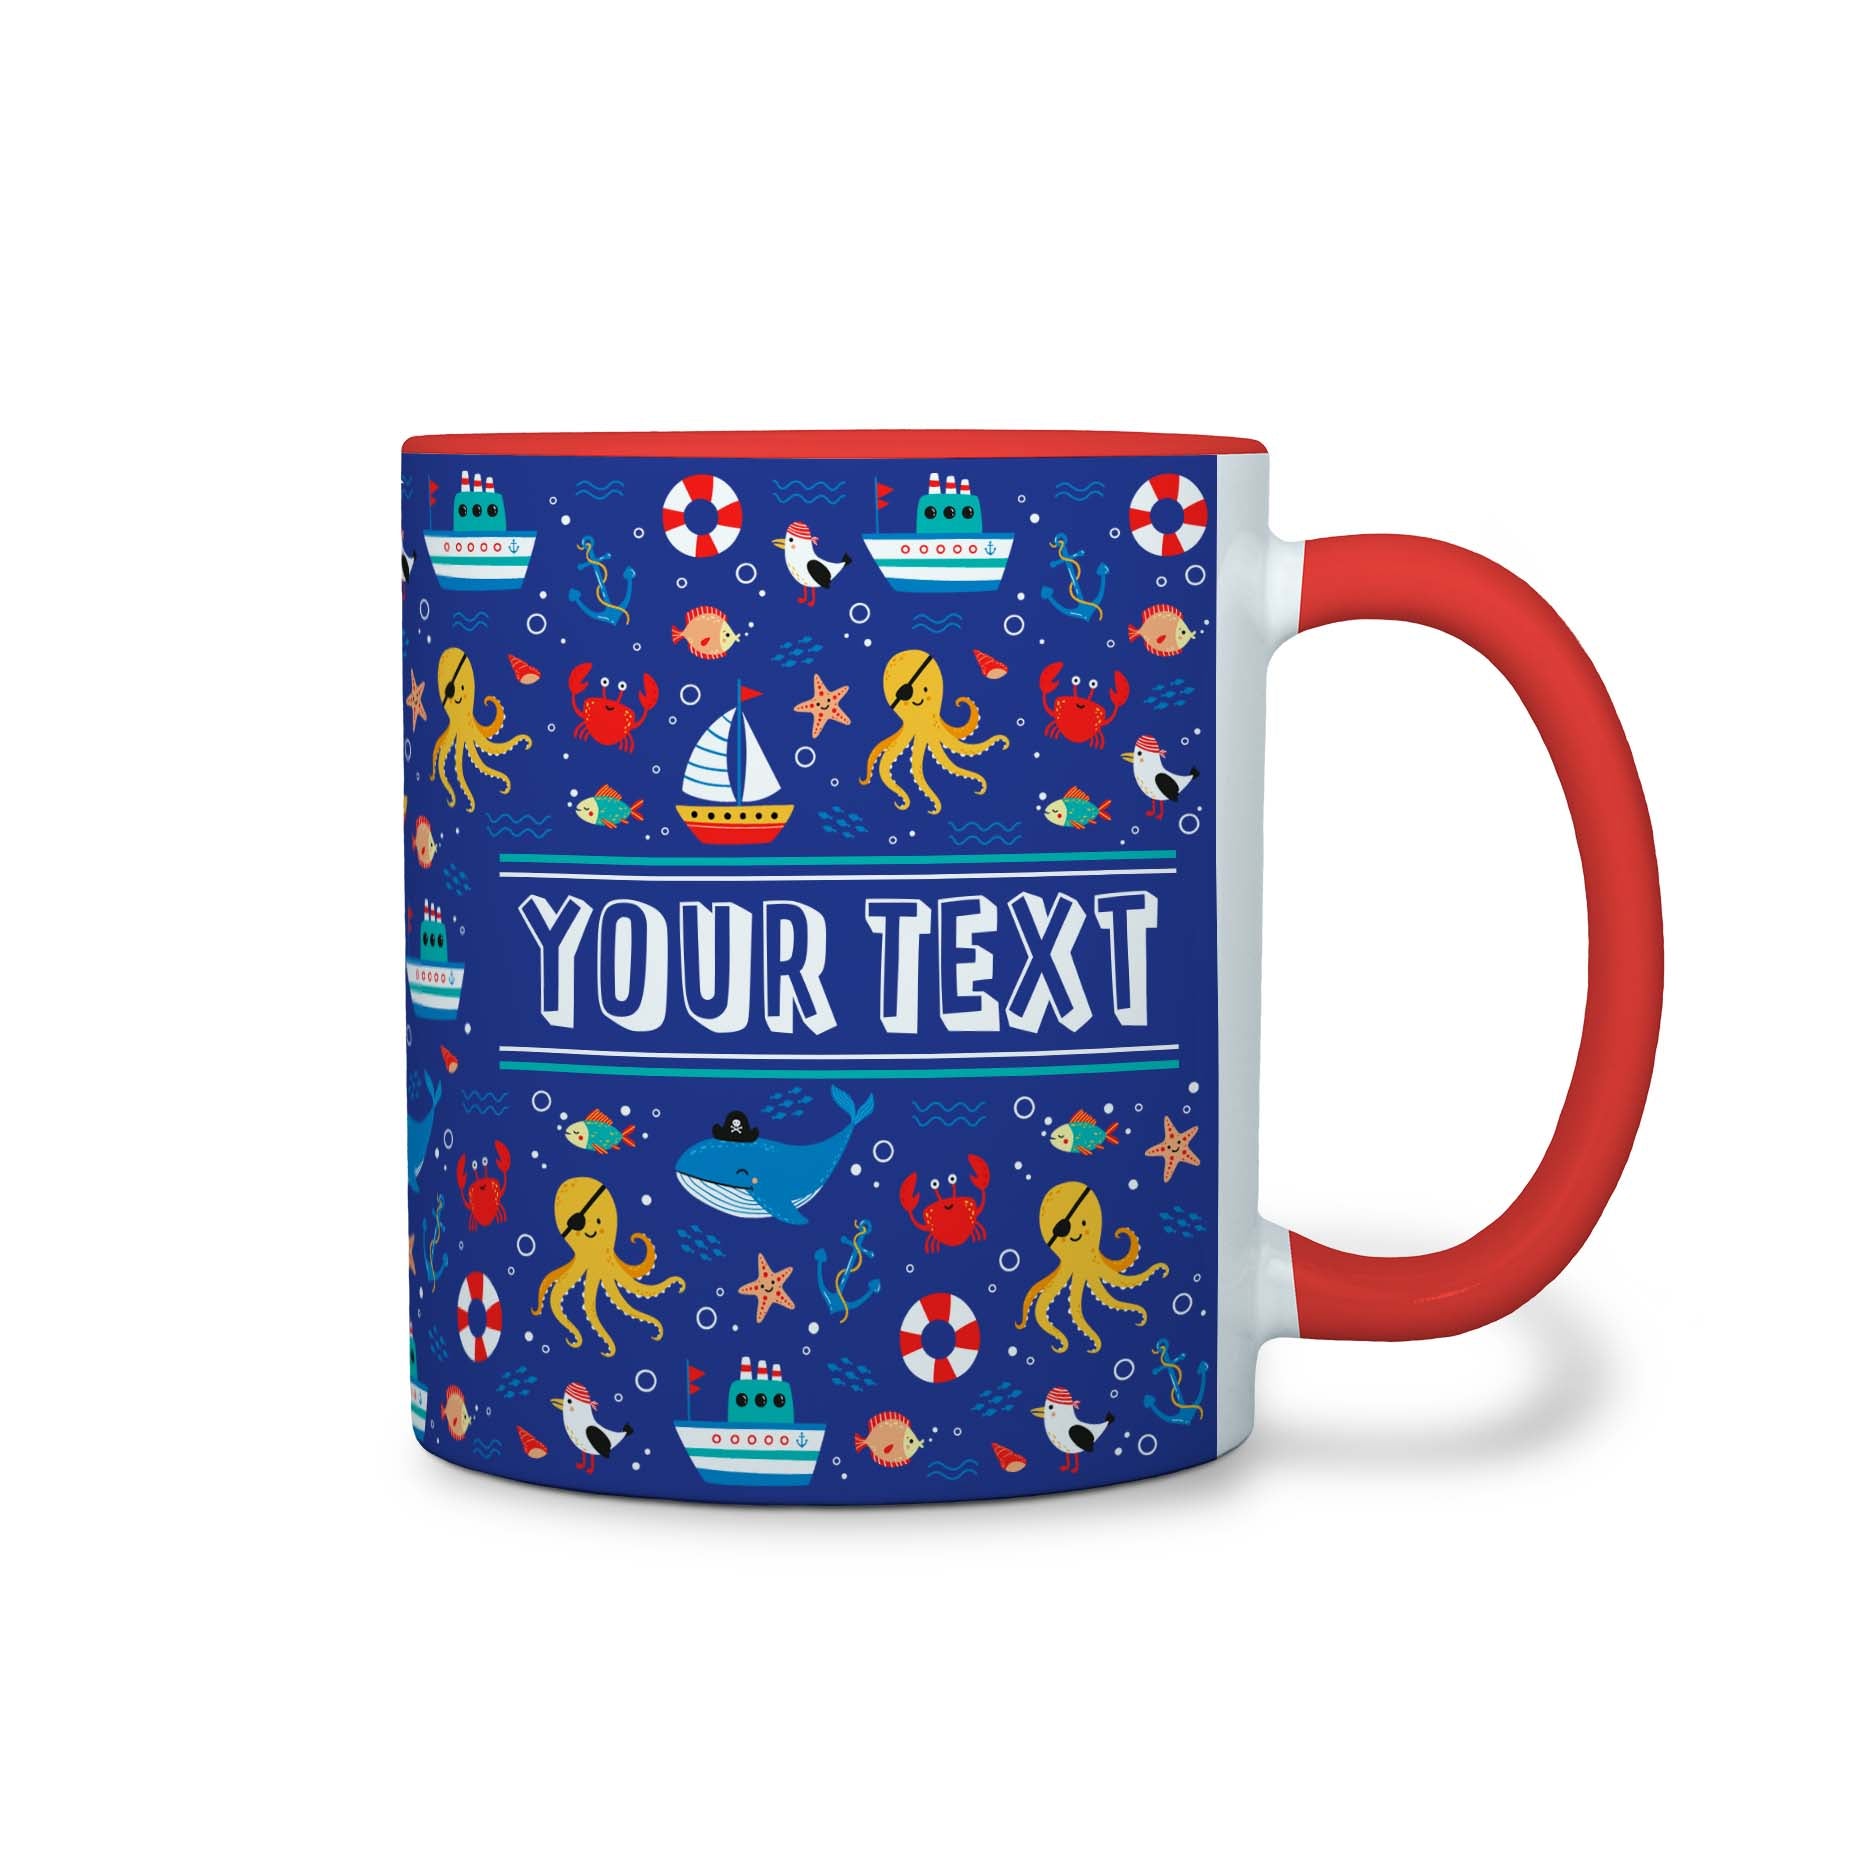 Personalized Red Accent Mug - Nautical - 11 Ounces